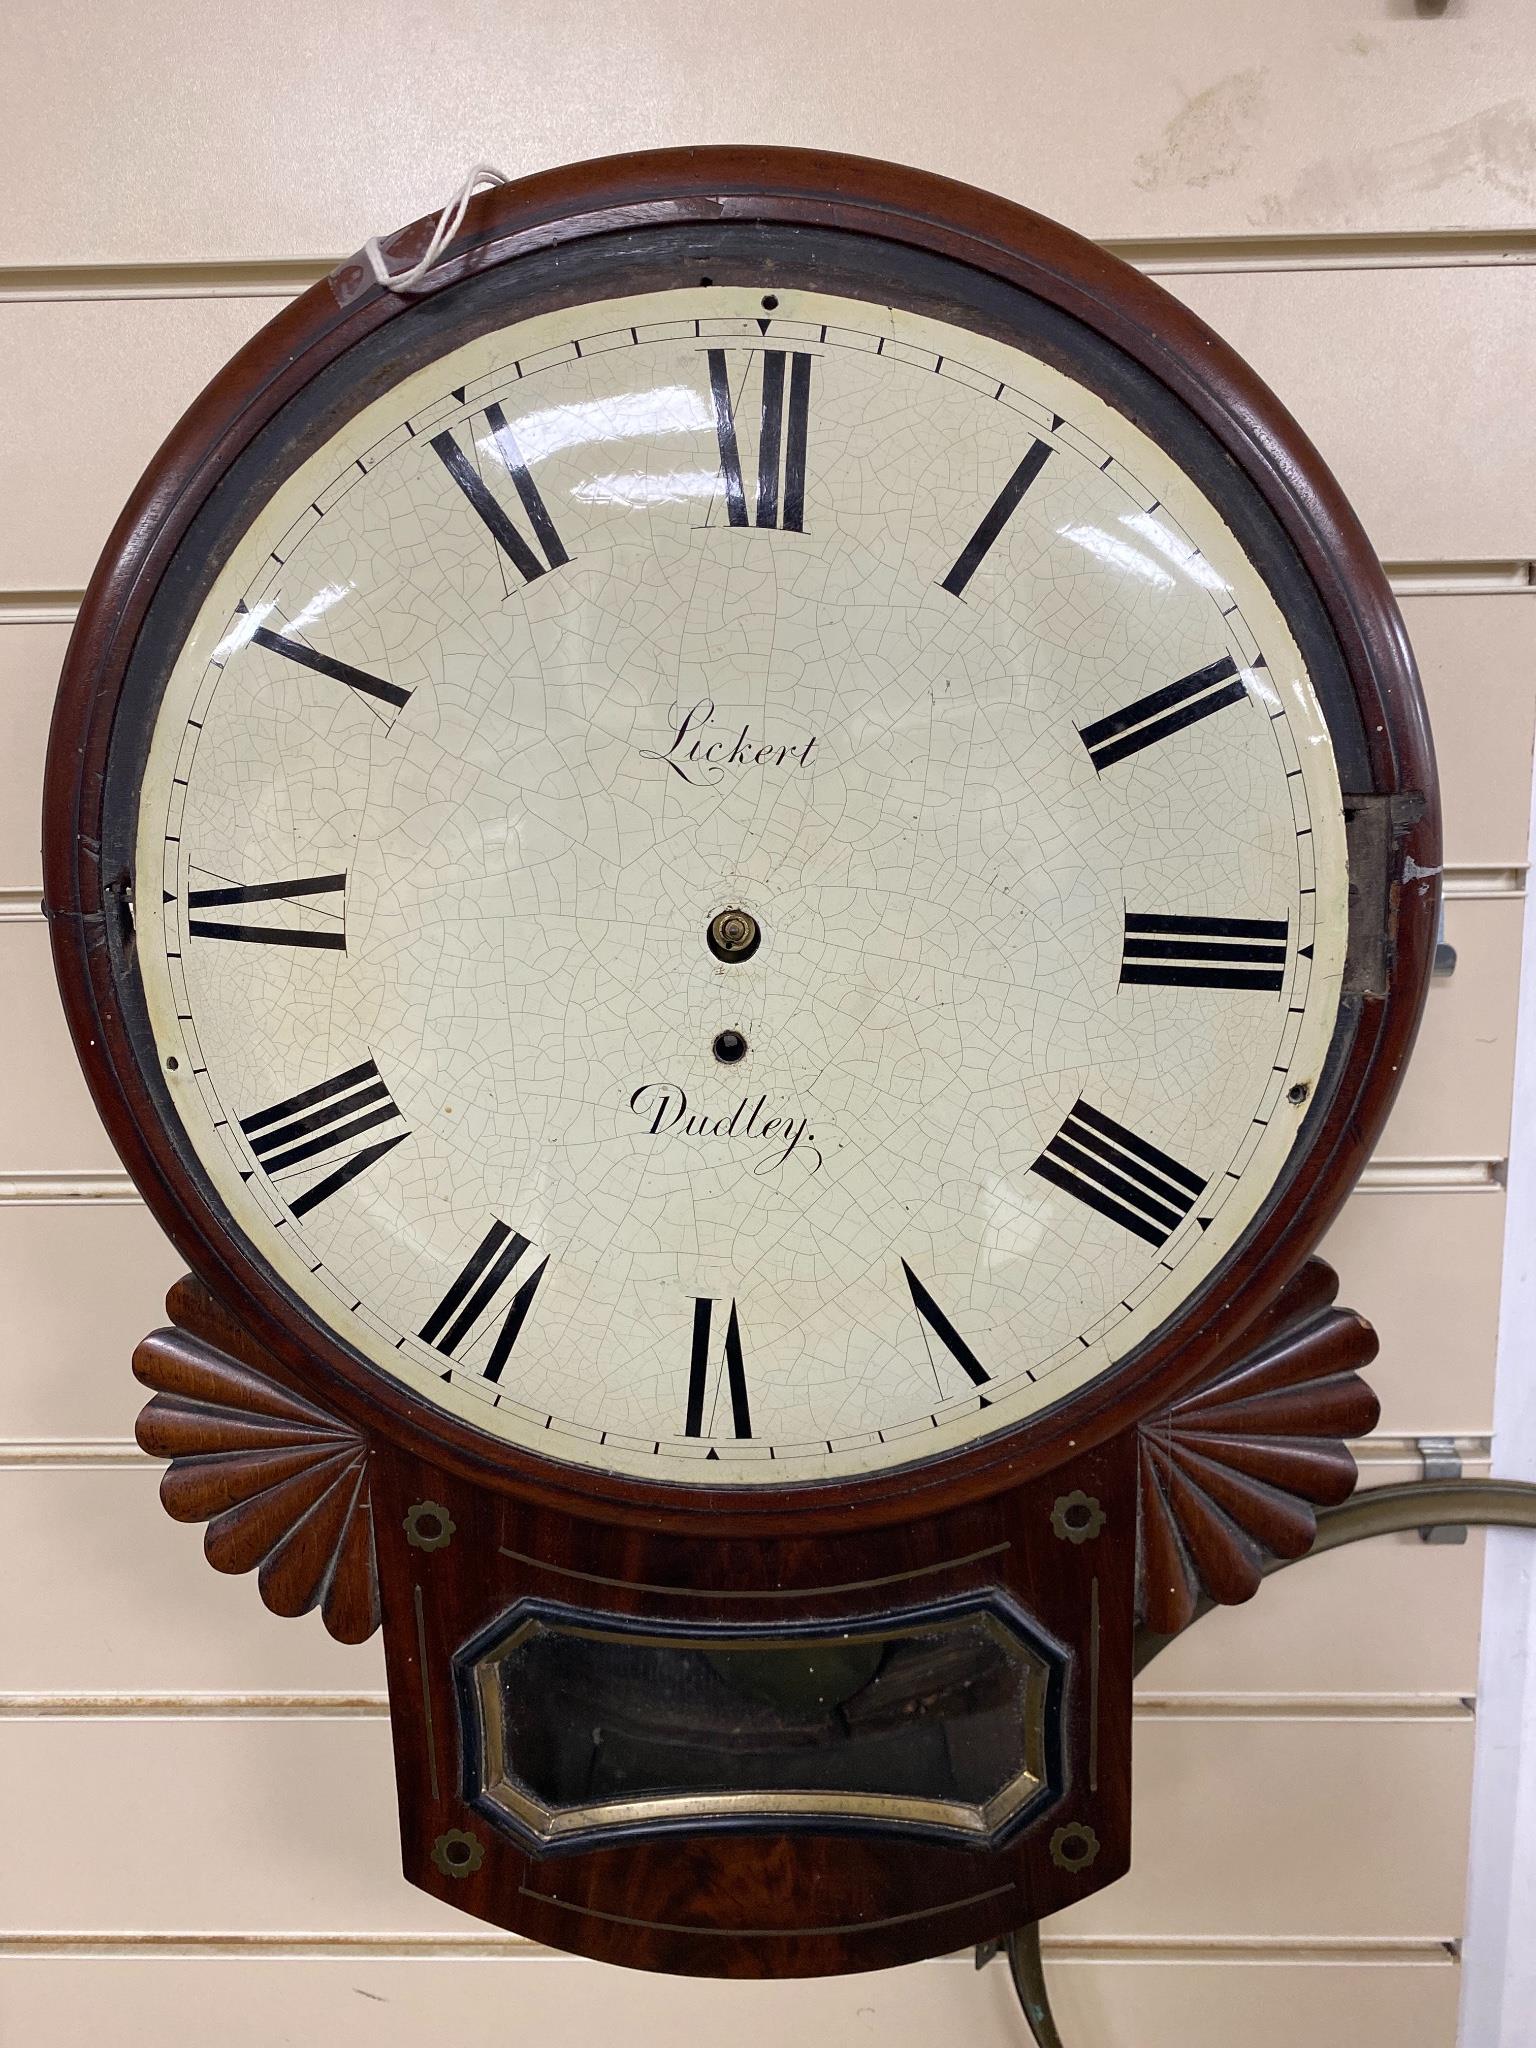 An early 19th century mahogany drop-dial wall clock, signed Sickert, Dudley (P), length 52cm